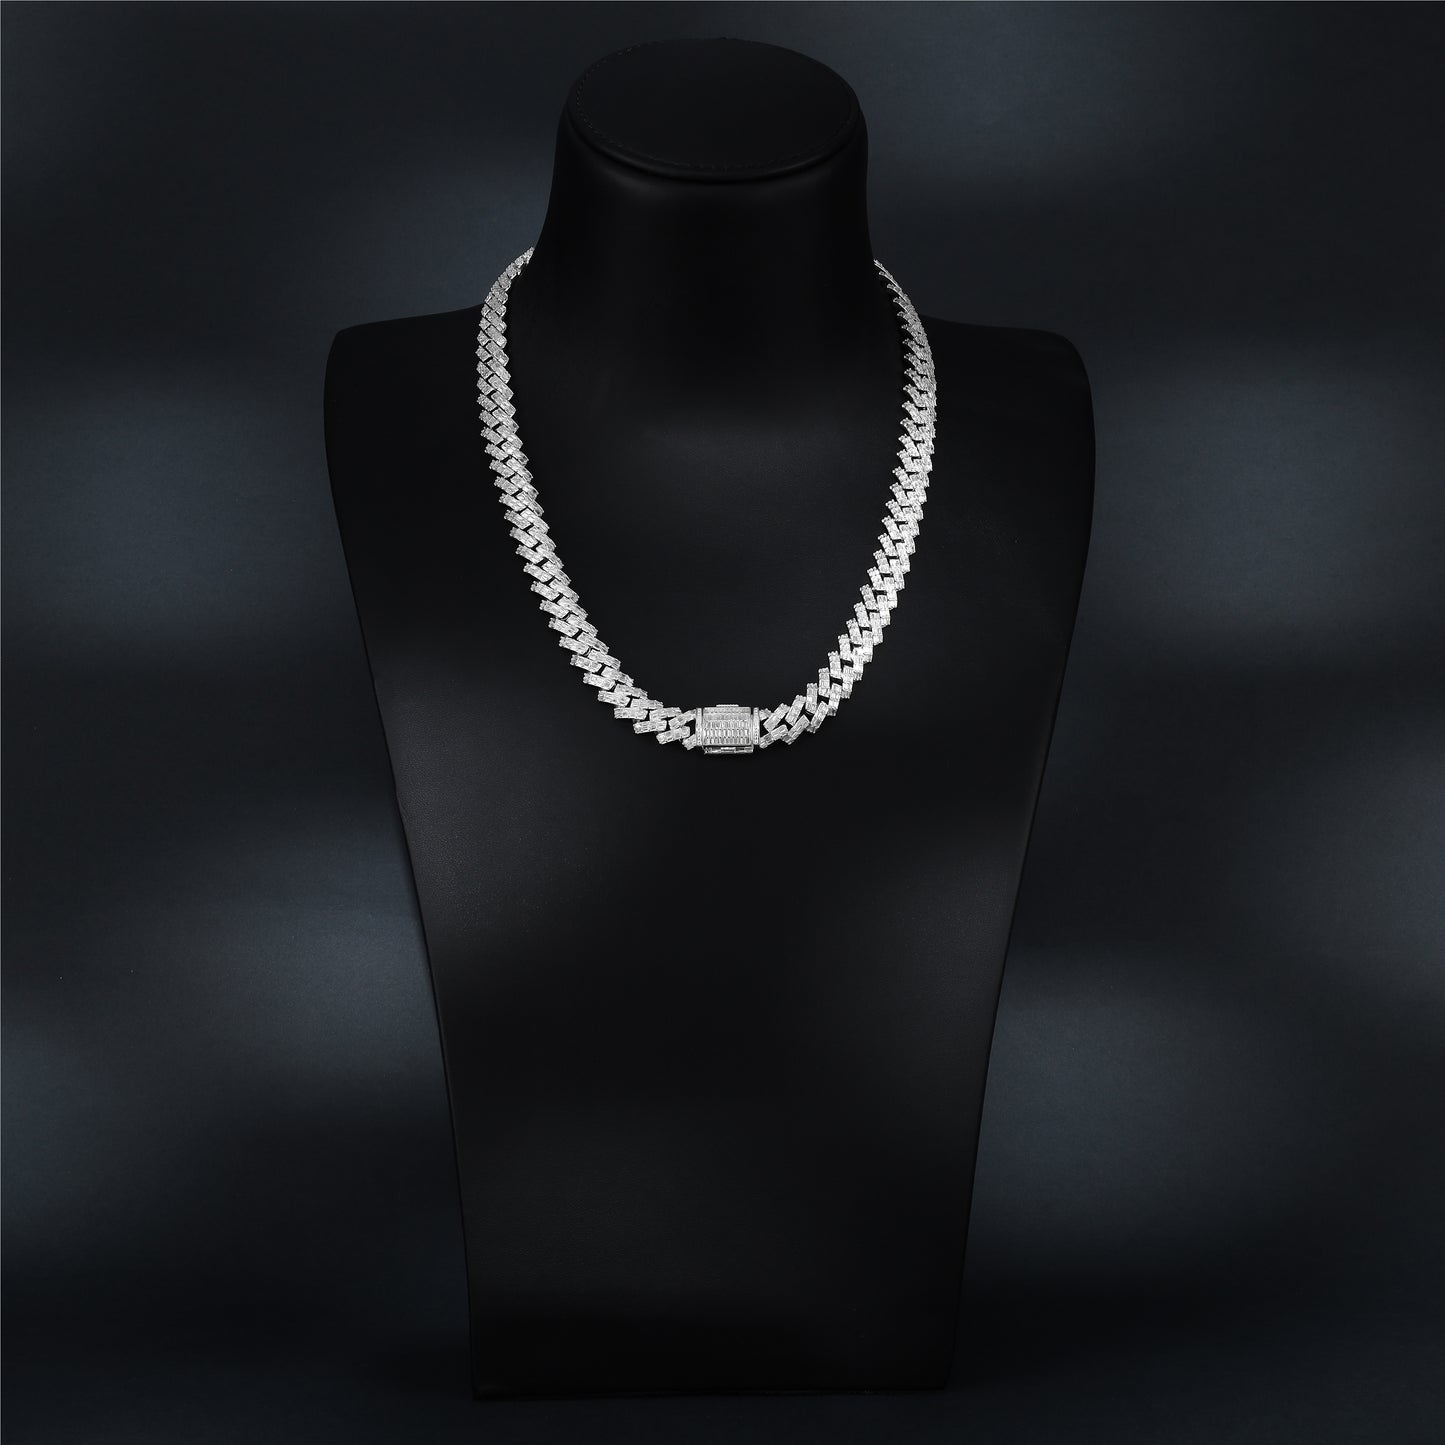 Iced Out Tennis chain 12mm breit 55cm lang aus 925 Sterling Silber (K989)